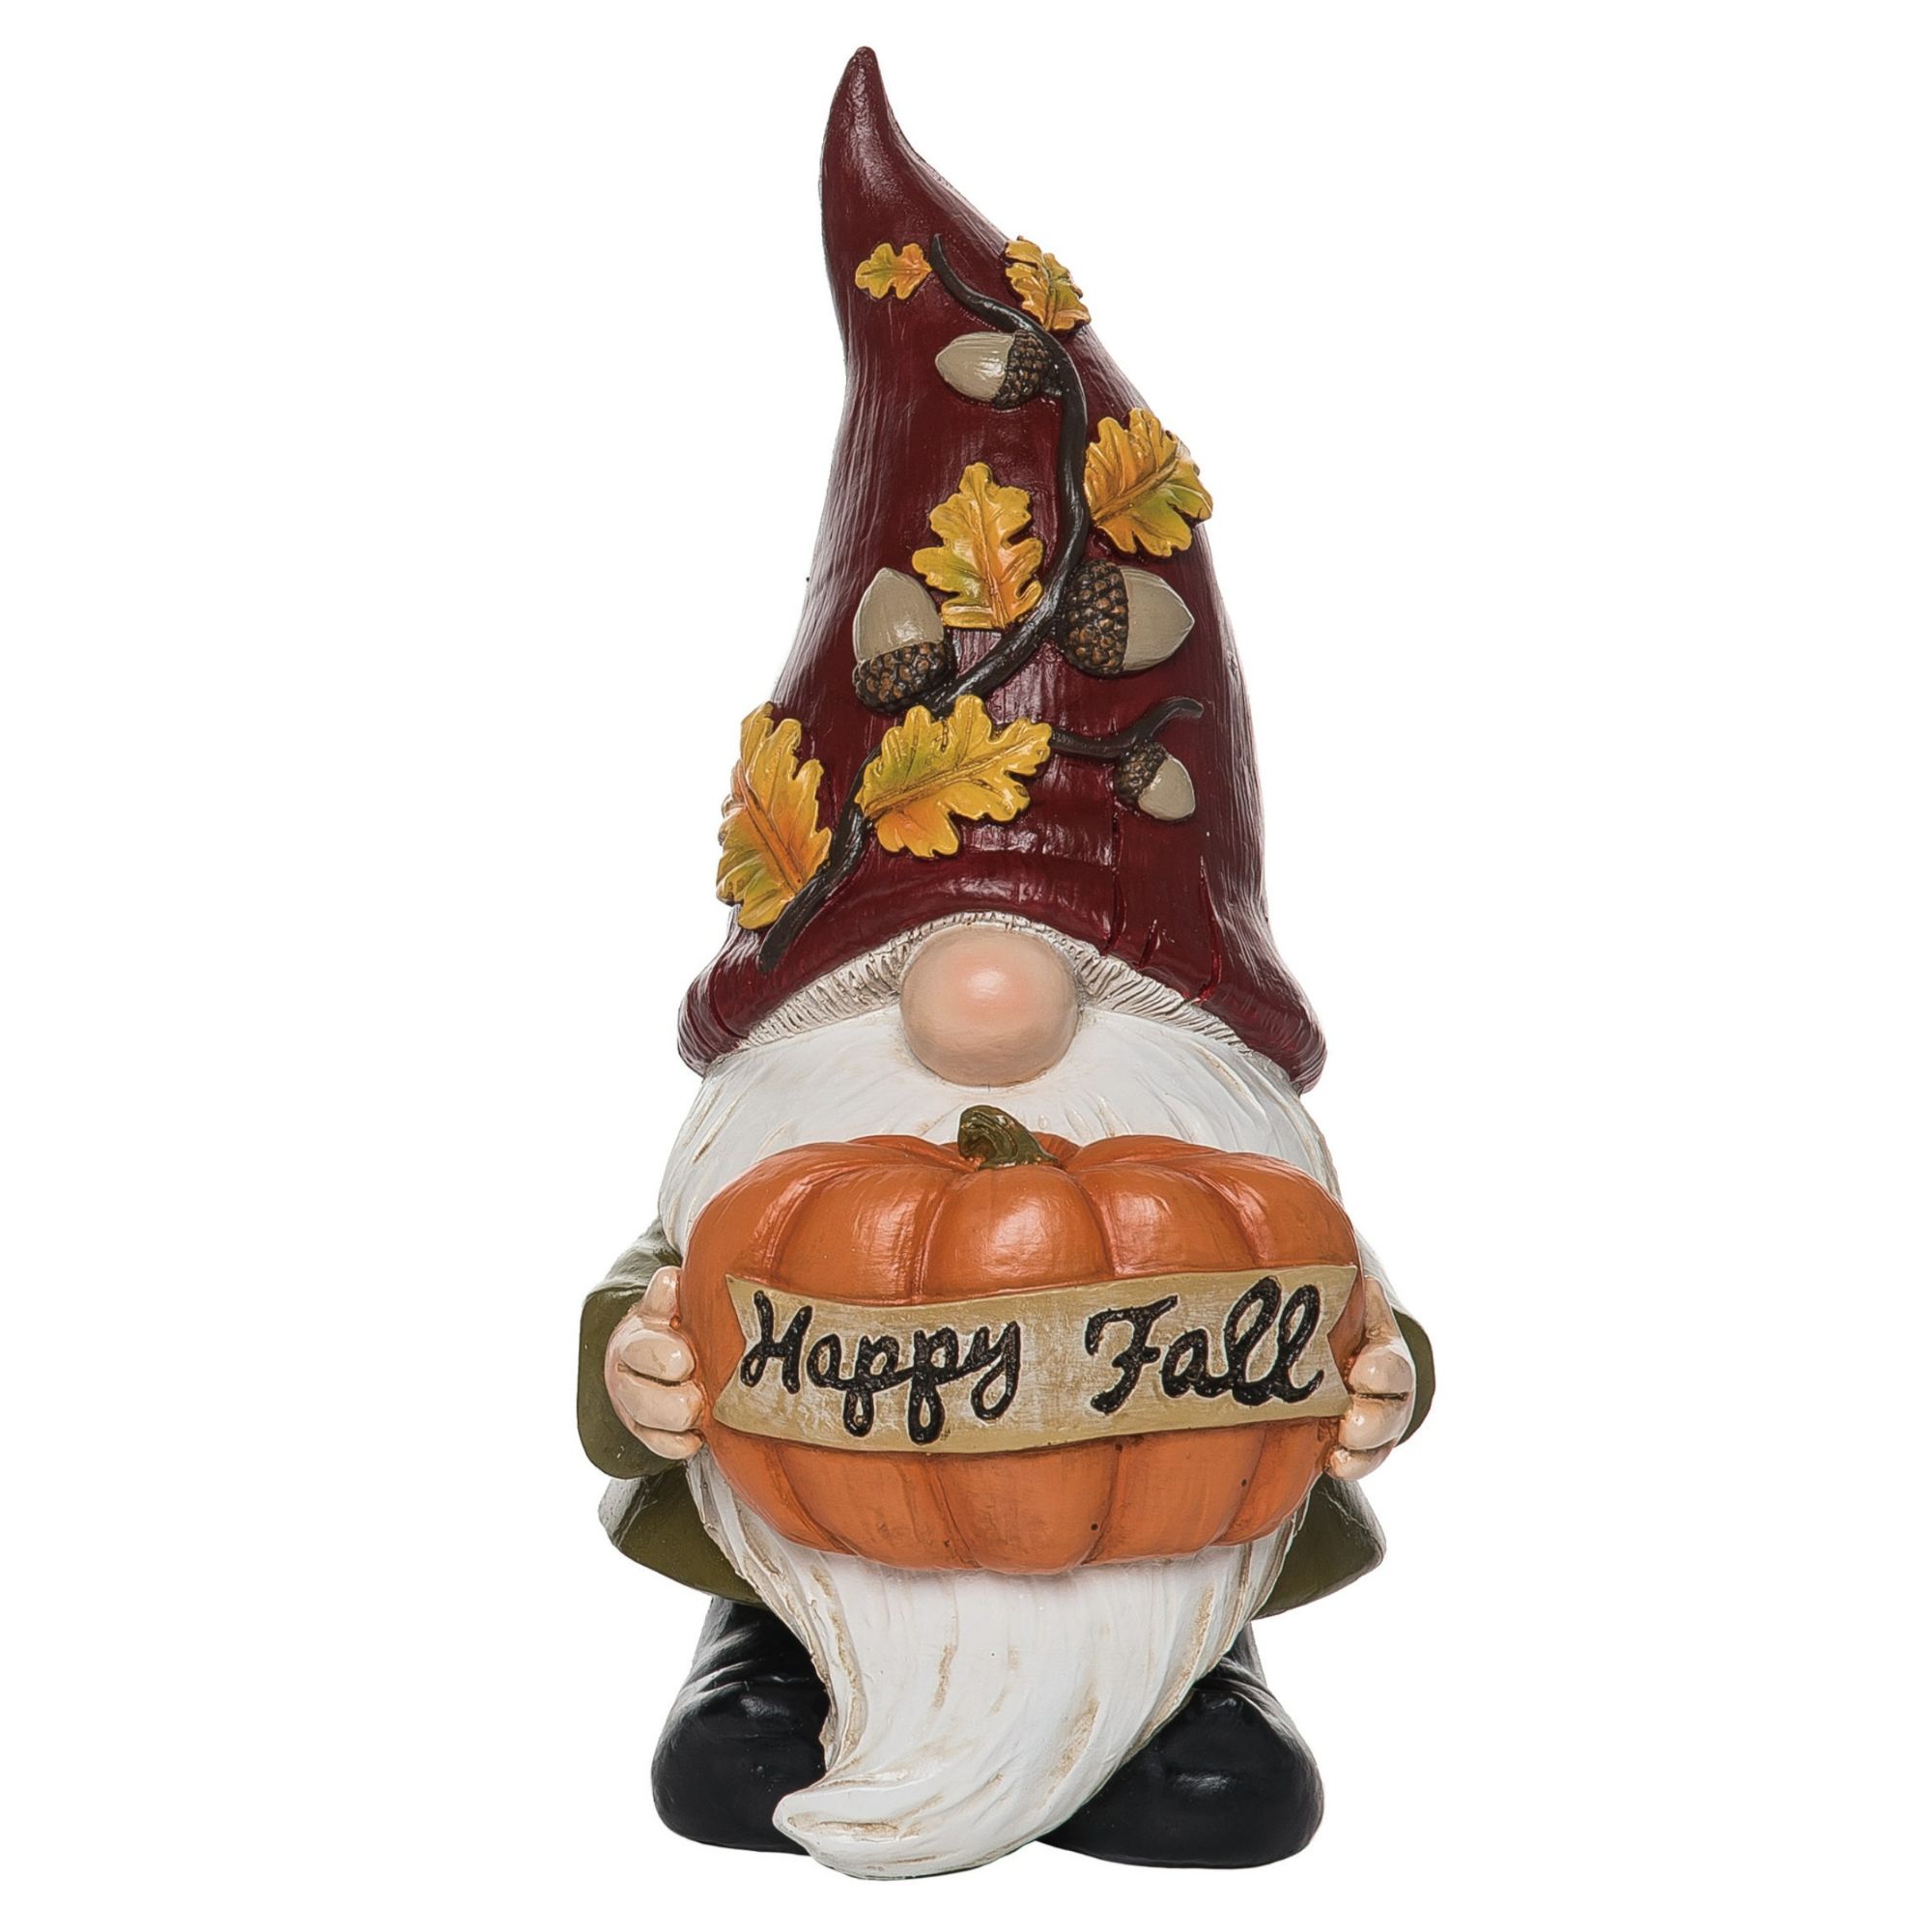 Contemporary Home Living 11" Gnome with Pumpkin "Happy Fall" Harvest Tabletop Figurine